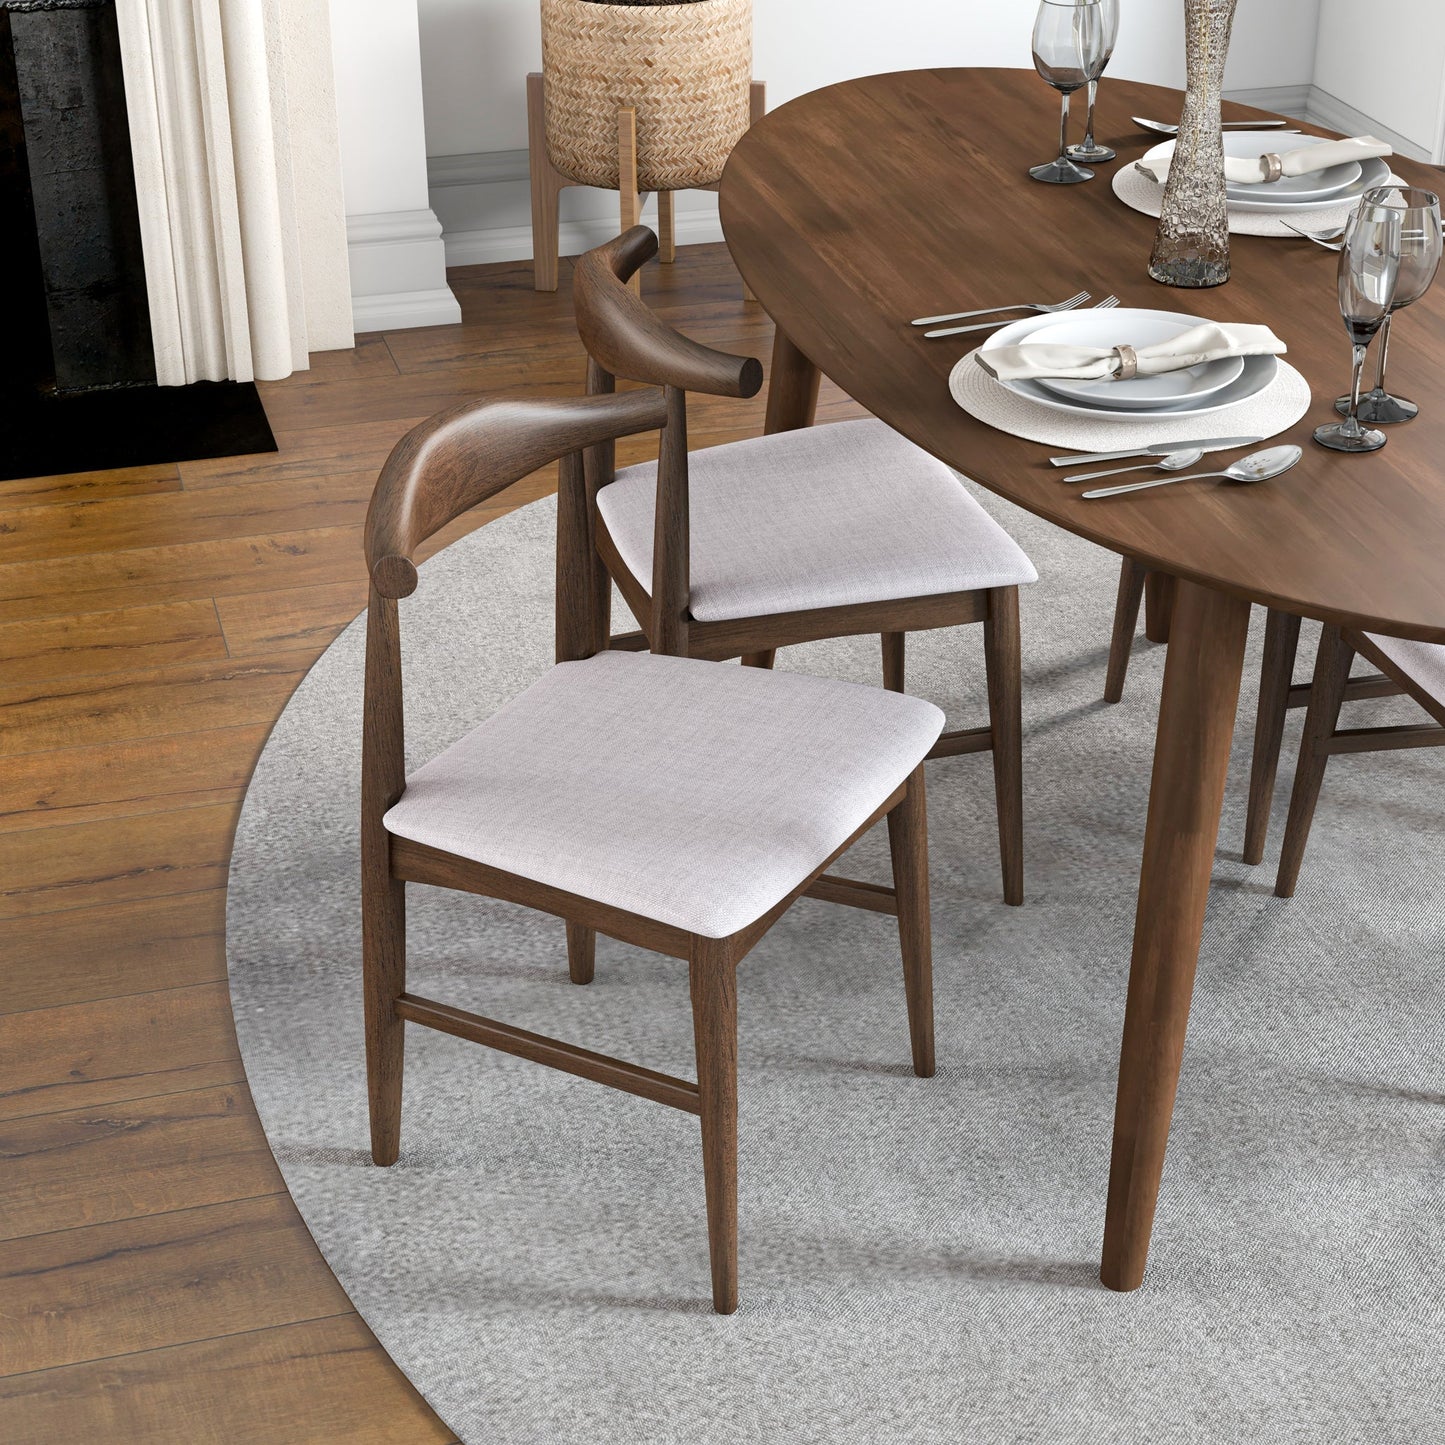 Rixos (Walnut) Oval Dining Set with 4 Winston (Beige) Dining Chairs